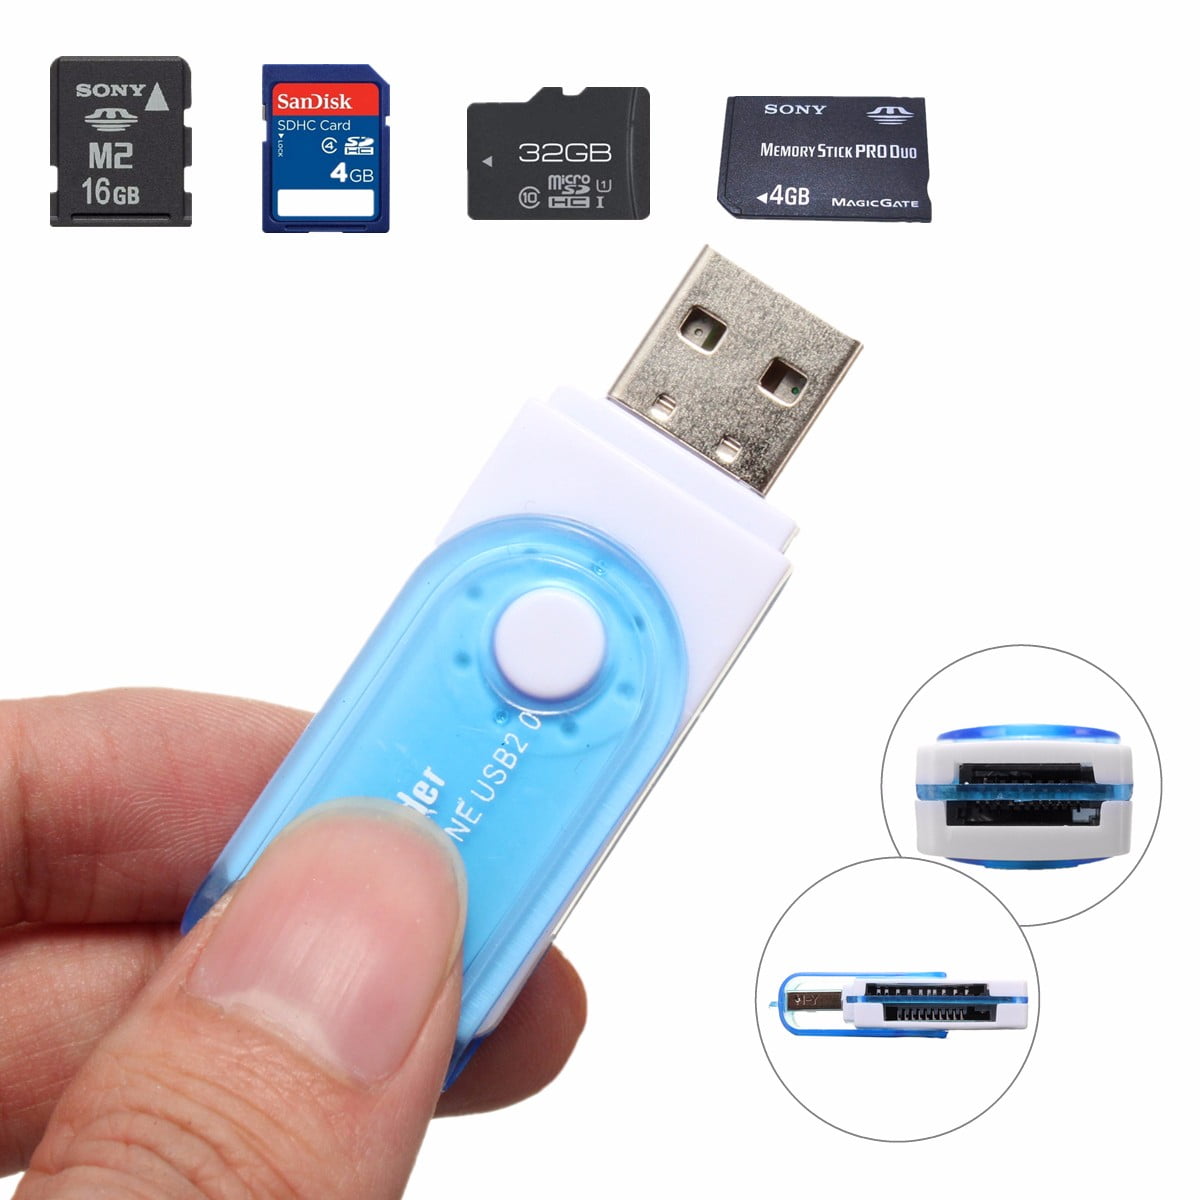 All in one USB 2.0 Micro SD/TF M2 MMC SDHC PRO Duo Memory Card Reader Adapter EF